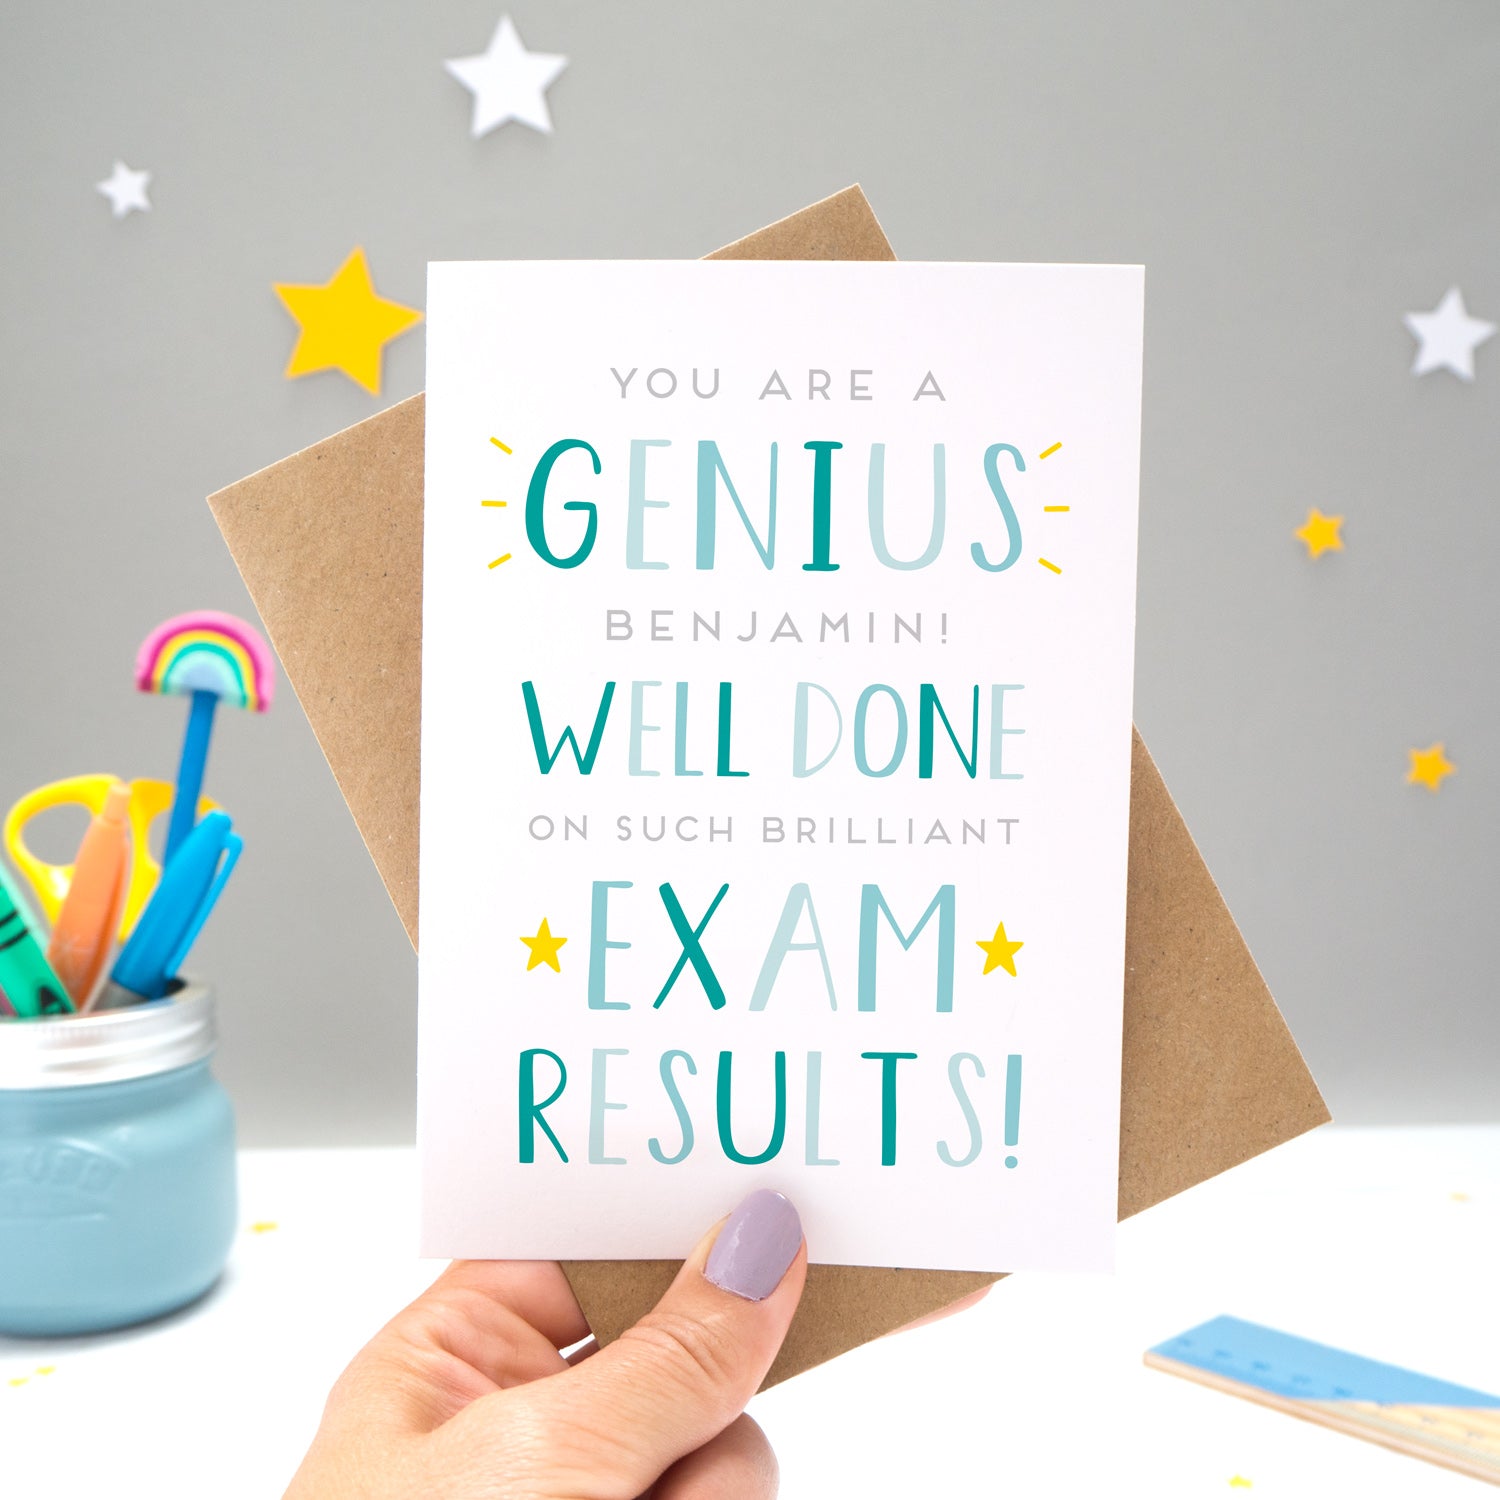 'You are a genius [insert name]! Well done on such brilliant exam results'. A personalised exam congratulations card featuring my hand drawn letters in varying shades of blue and yellow stars.